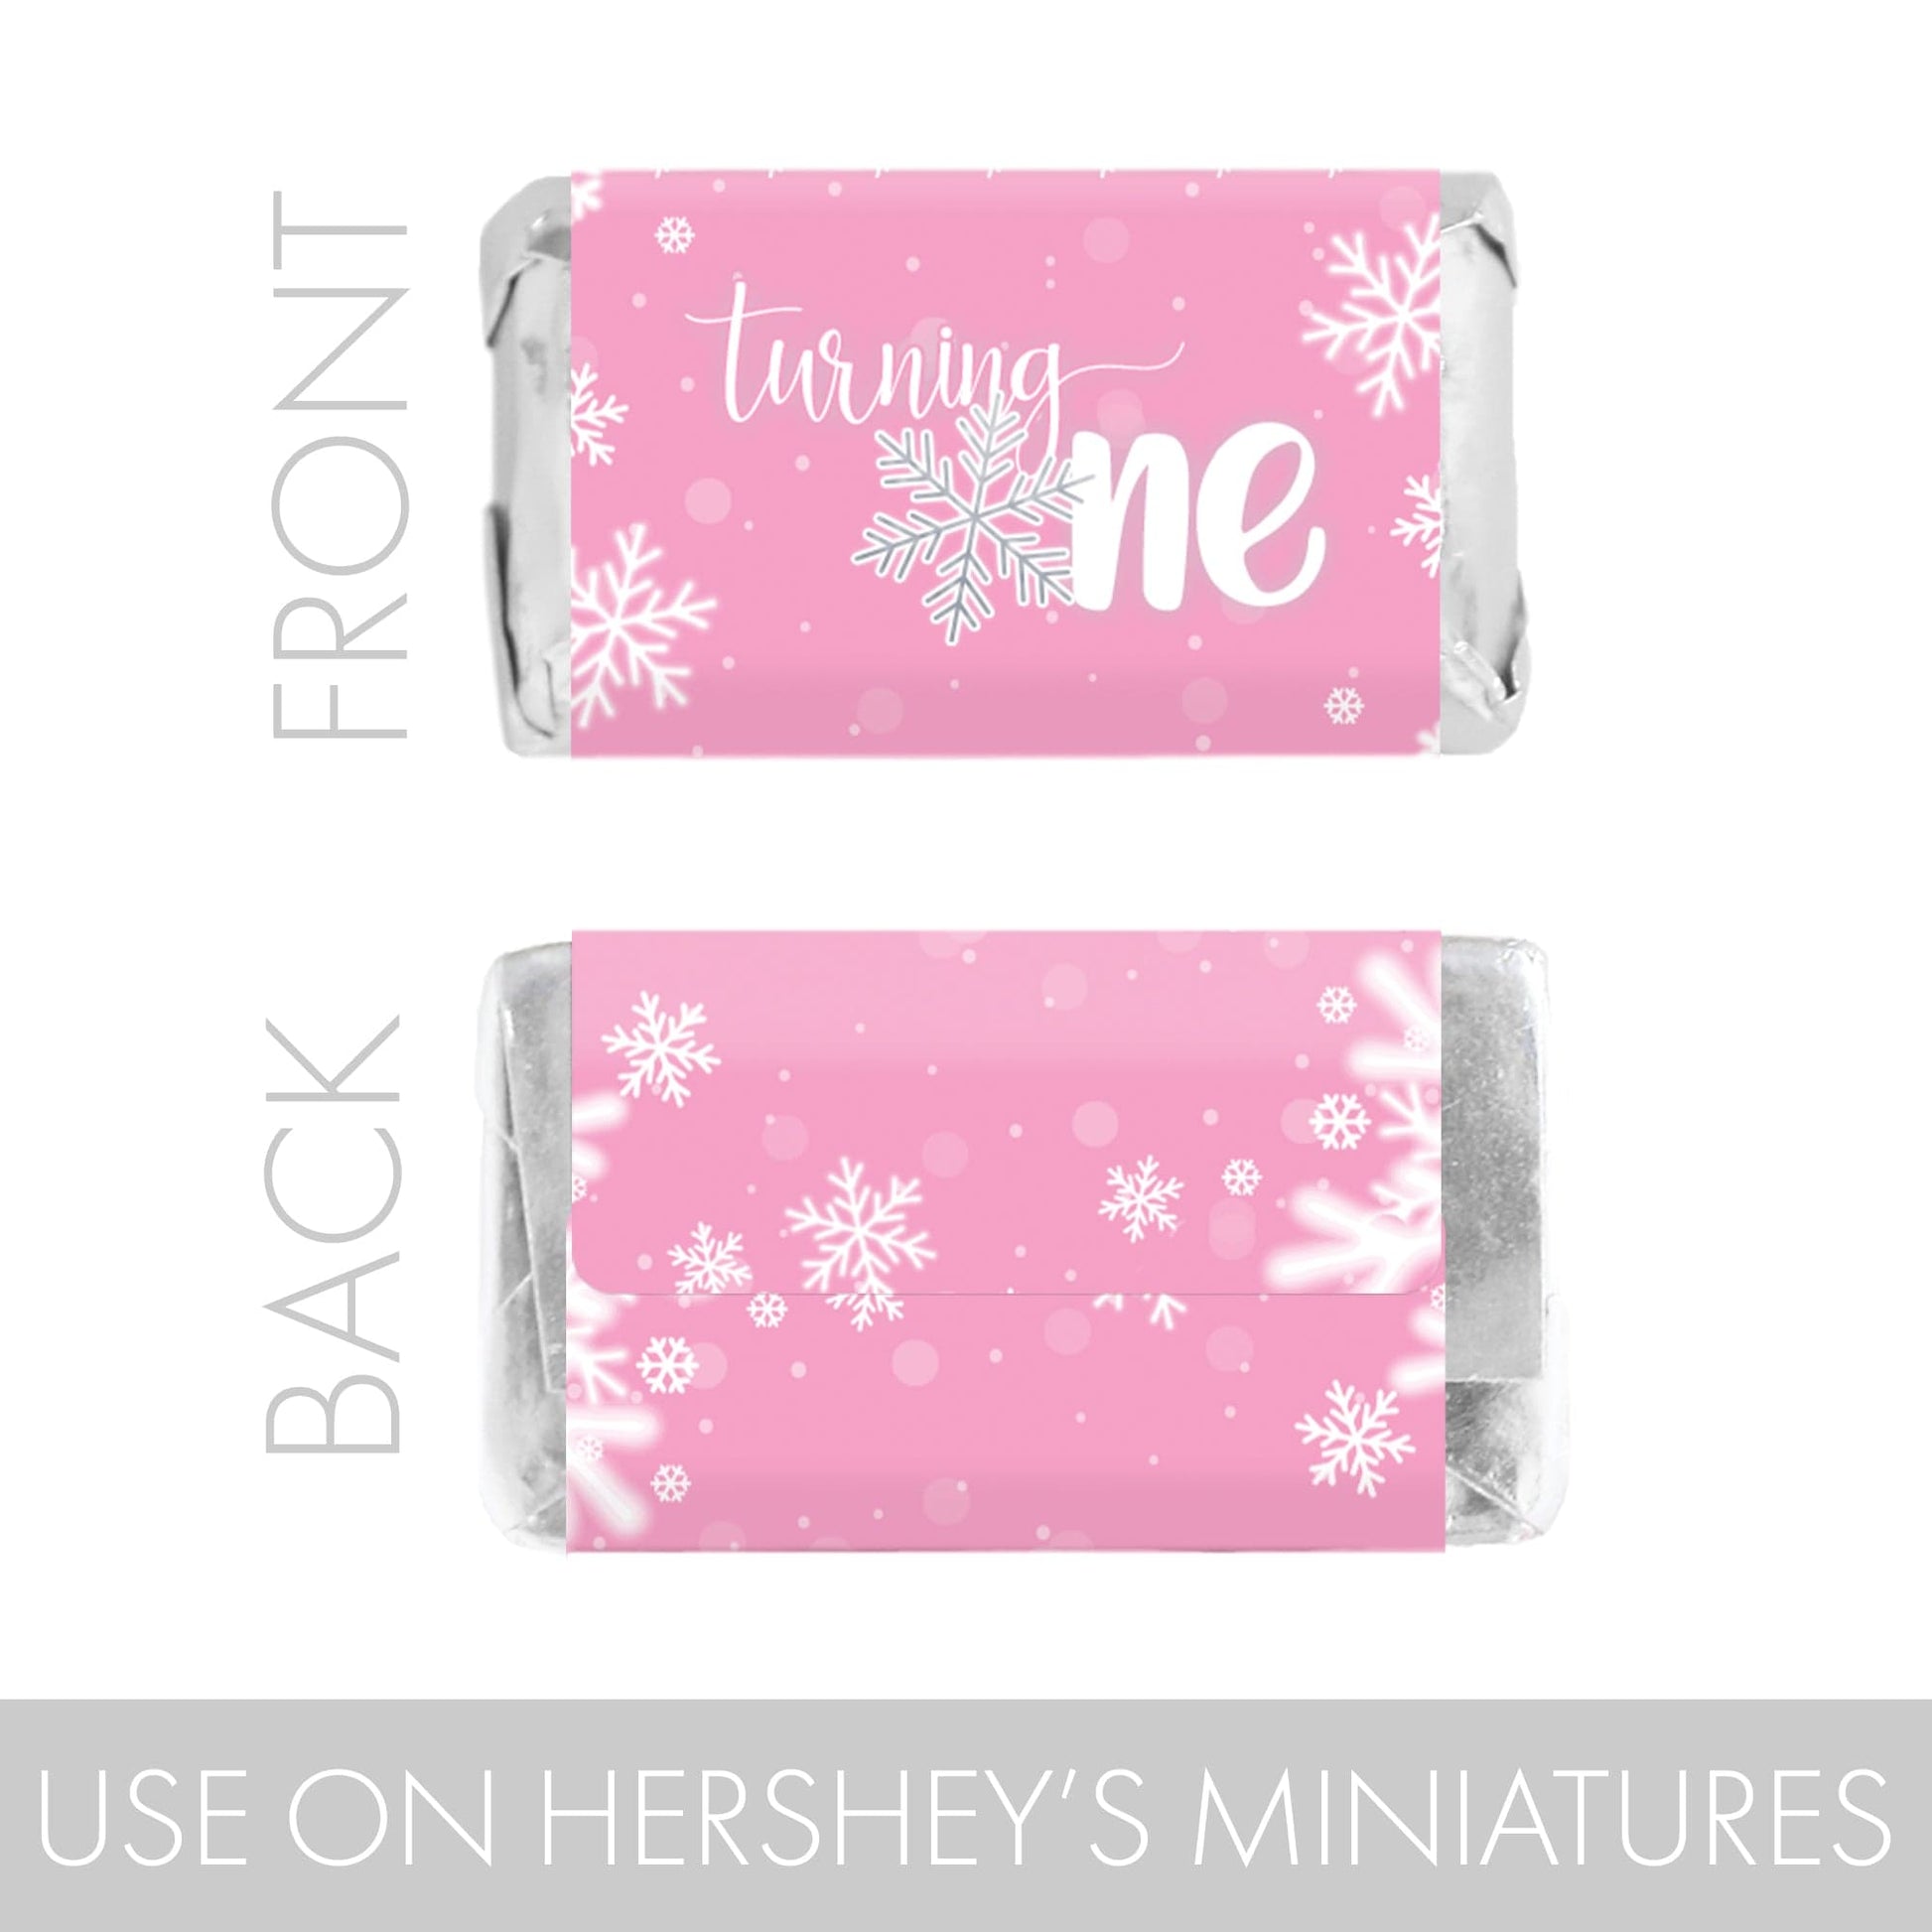 Add a special wintery touch to your Onederland Snowflake first birthday party with these mini candy bar wrappers